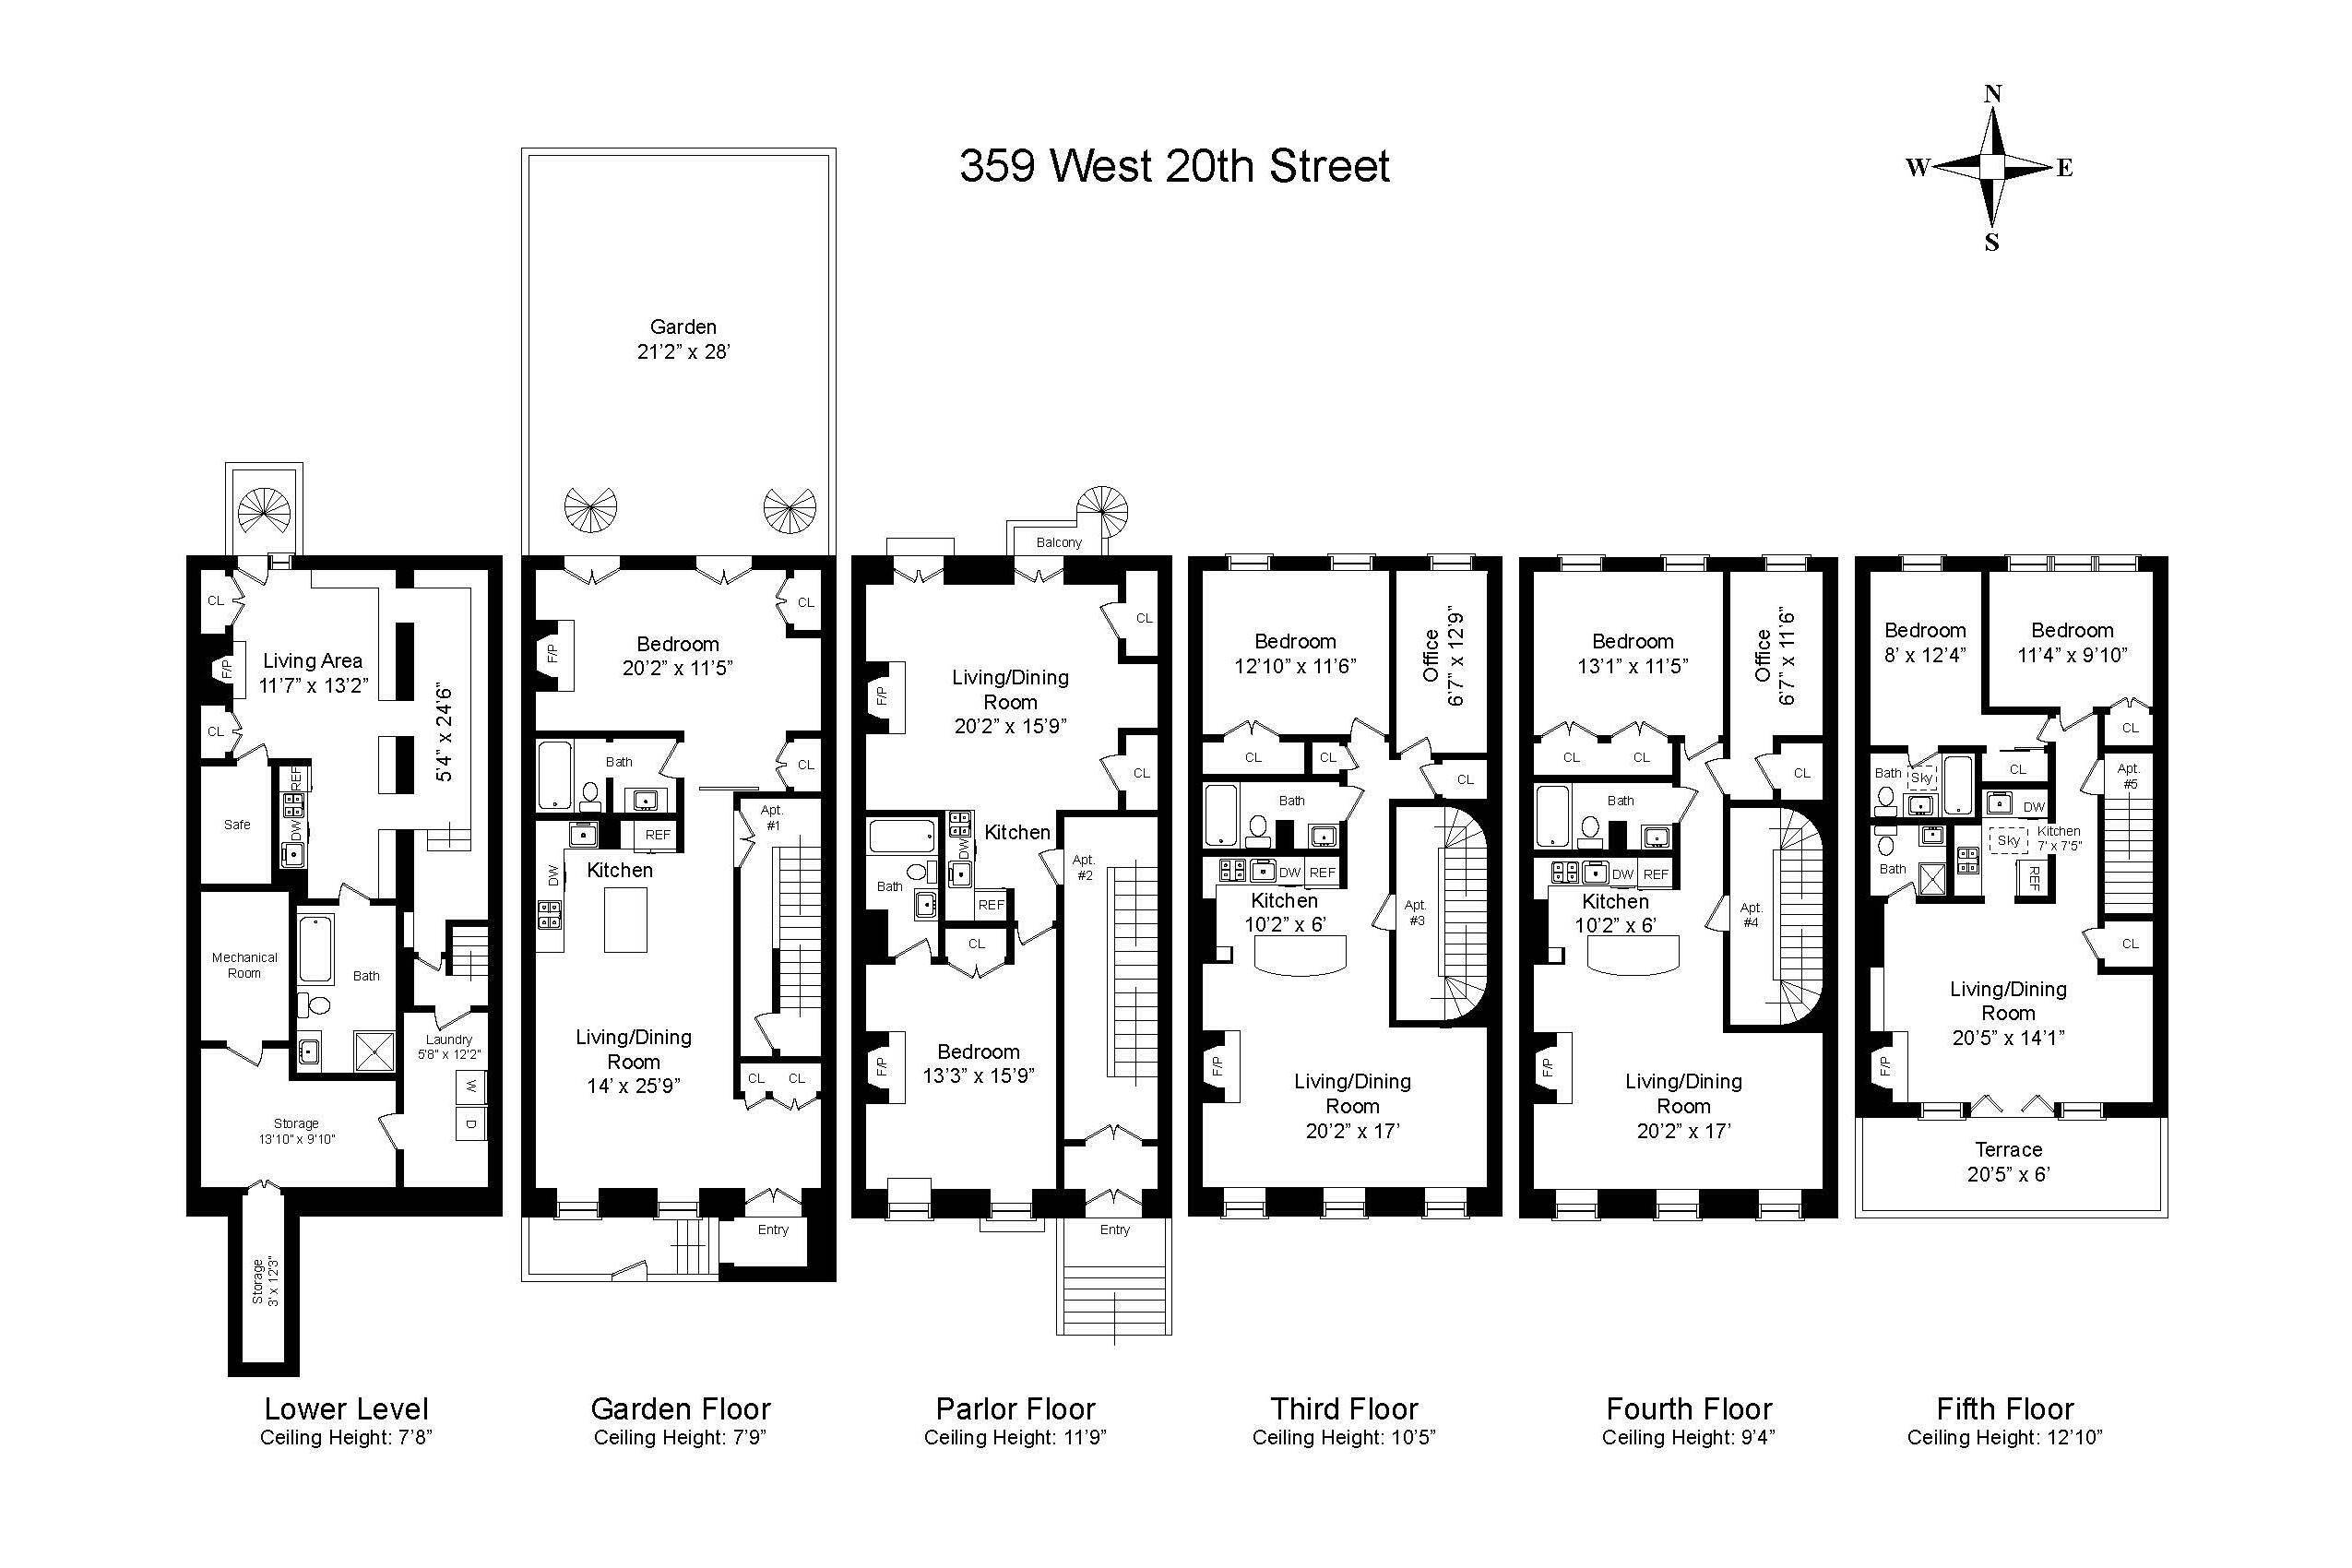 Property for Sale at 359 West 20th Street New York, New York 10011 United States